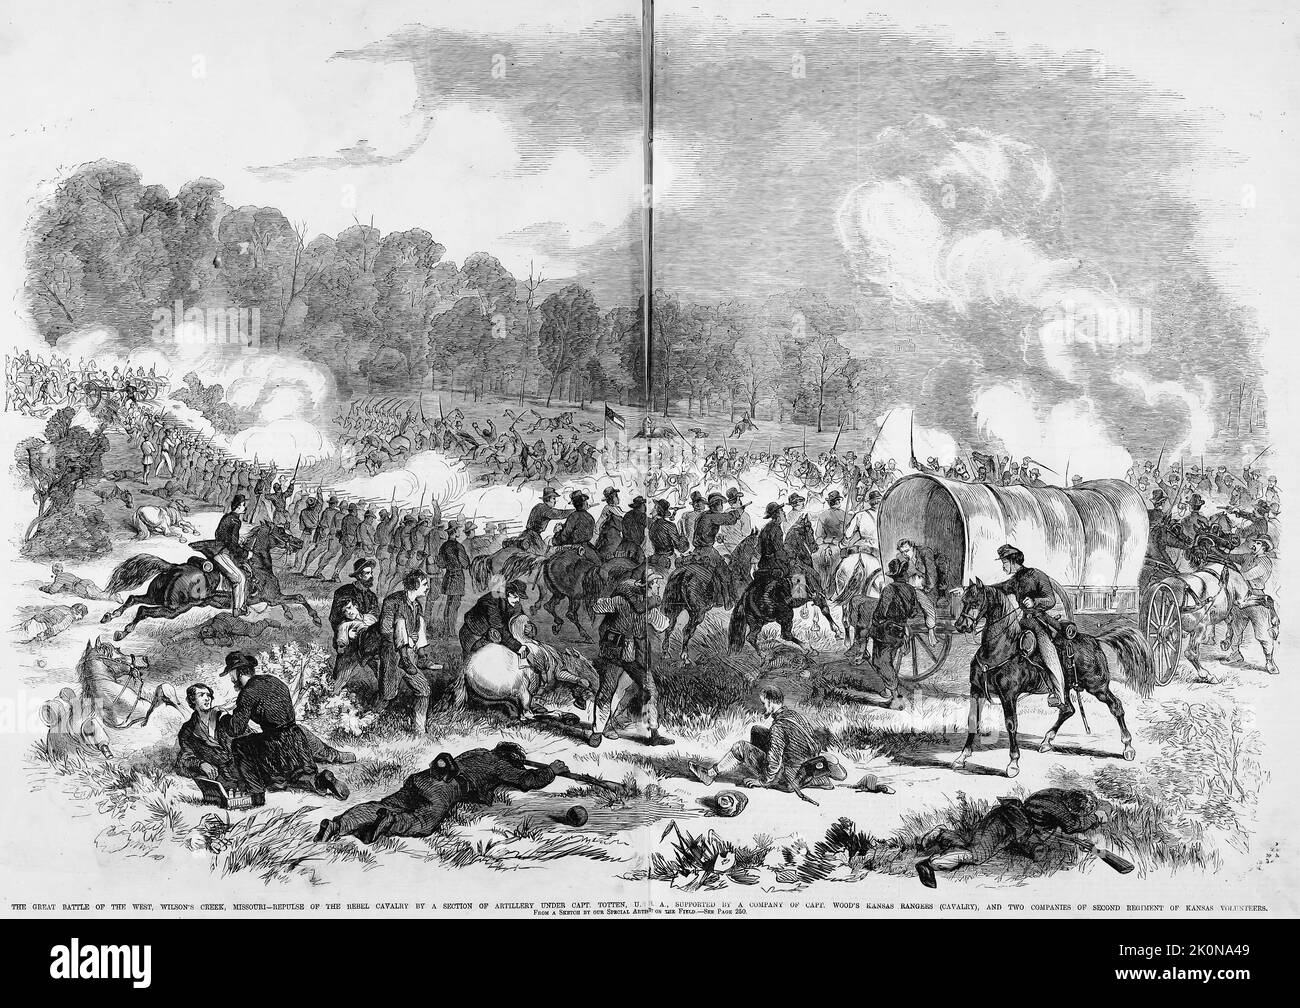 The Great Battle of the West, Wilson's Creek, Missouri - Repulse of the Rebel cavalry by a section of artillery under Captain James Totten, supported by a company of Captain Wood's Kansas Rangers (Cavalry), and two companies of Second Regiment of Kansas Volunteers. August 10th, 1861. 19th century American Civil War illustration from Frank Leslie's Illustrated Newspaper Stock Photo